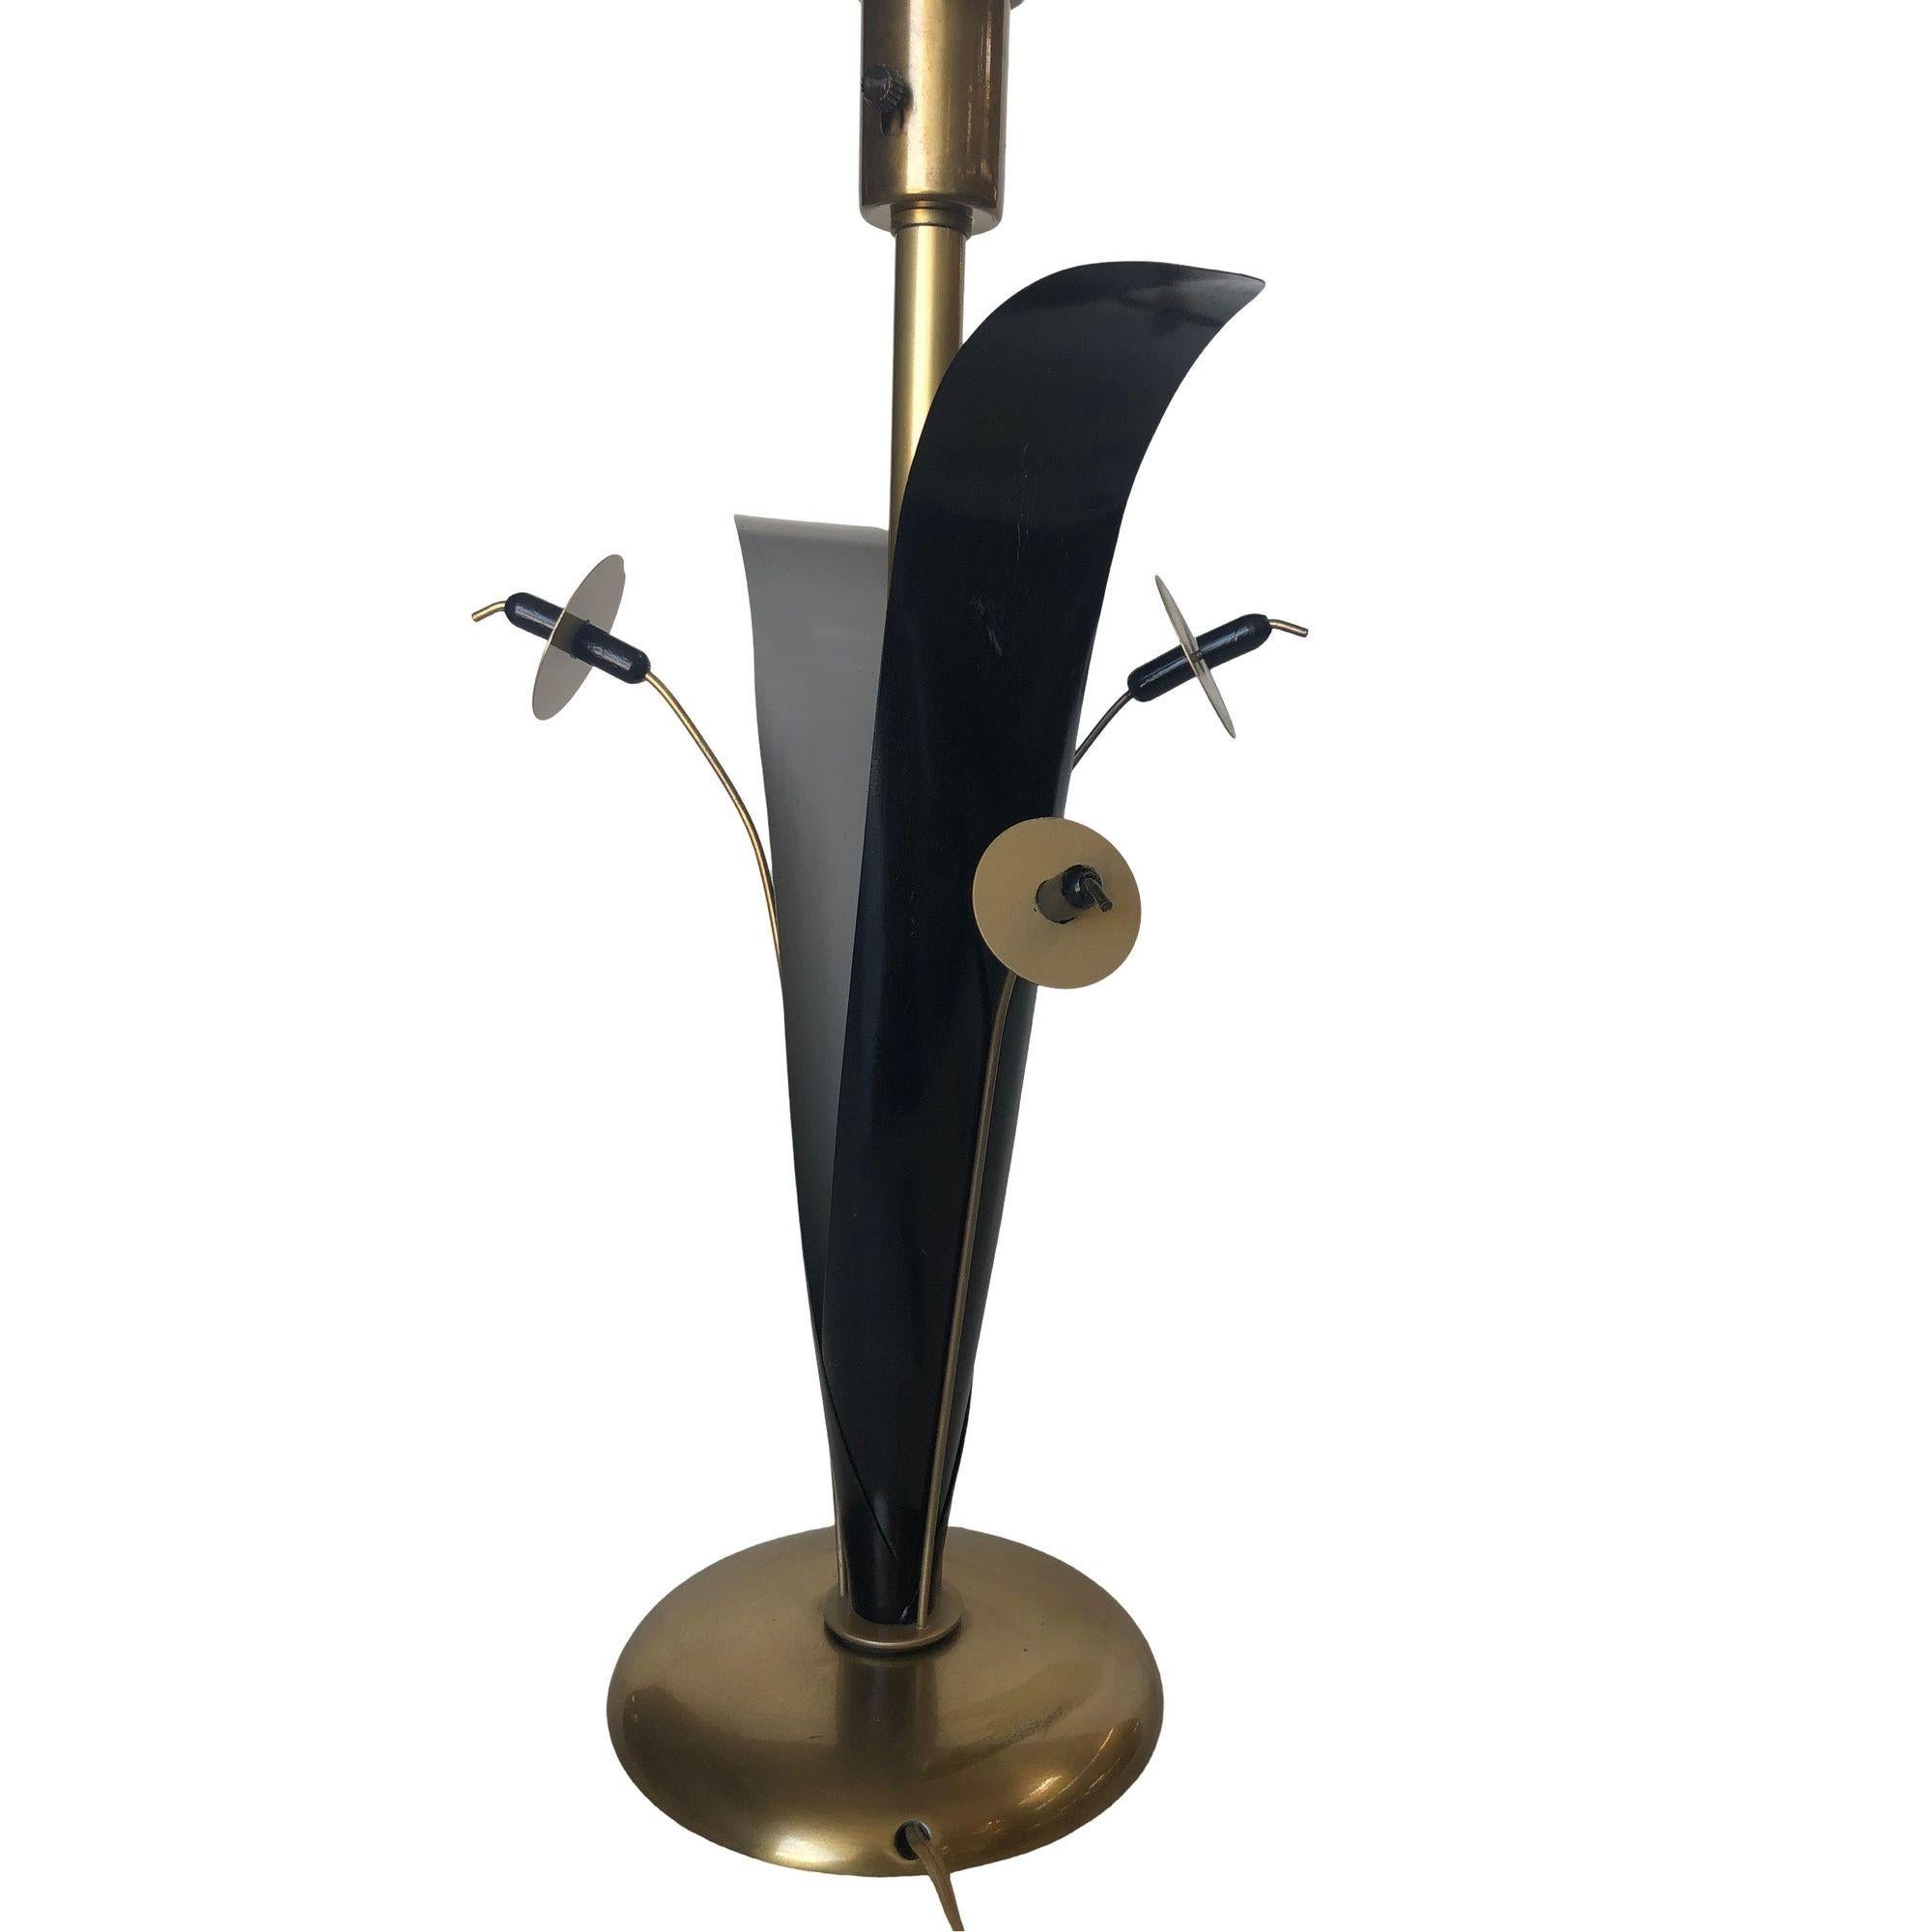 Pair of Midcentury Brass and Black Metal Willow Table Lamps In Excellent Condition For Sale In Van Nuys, CA